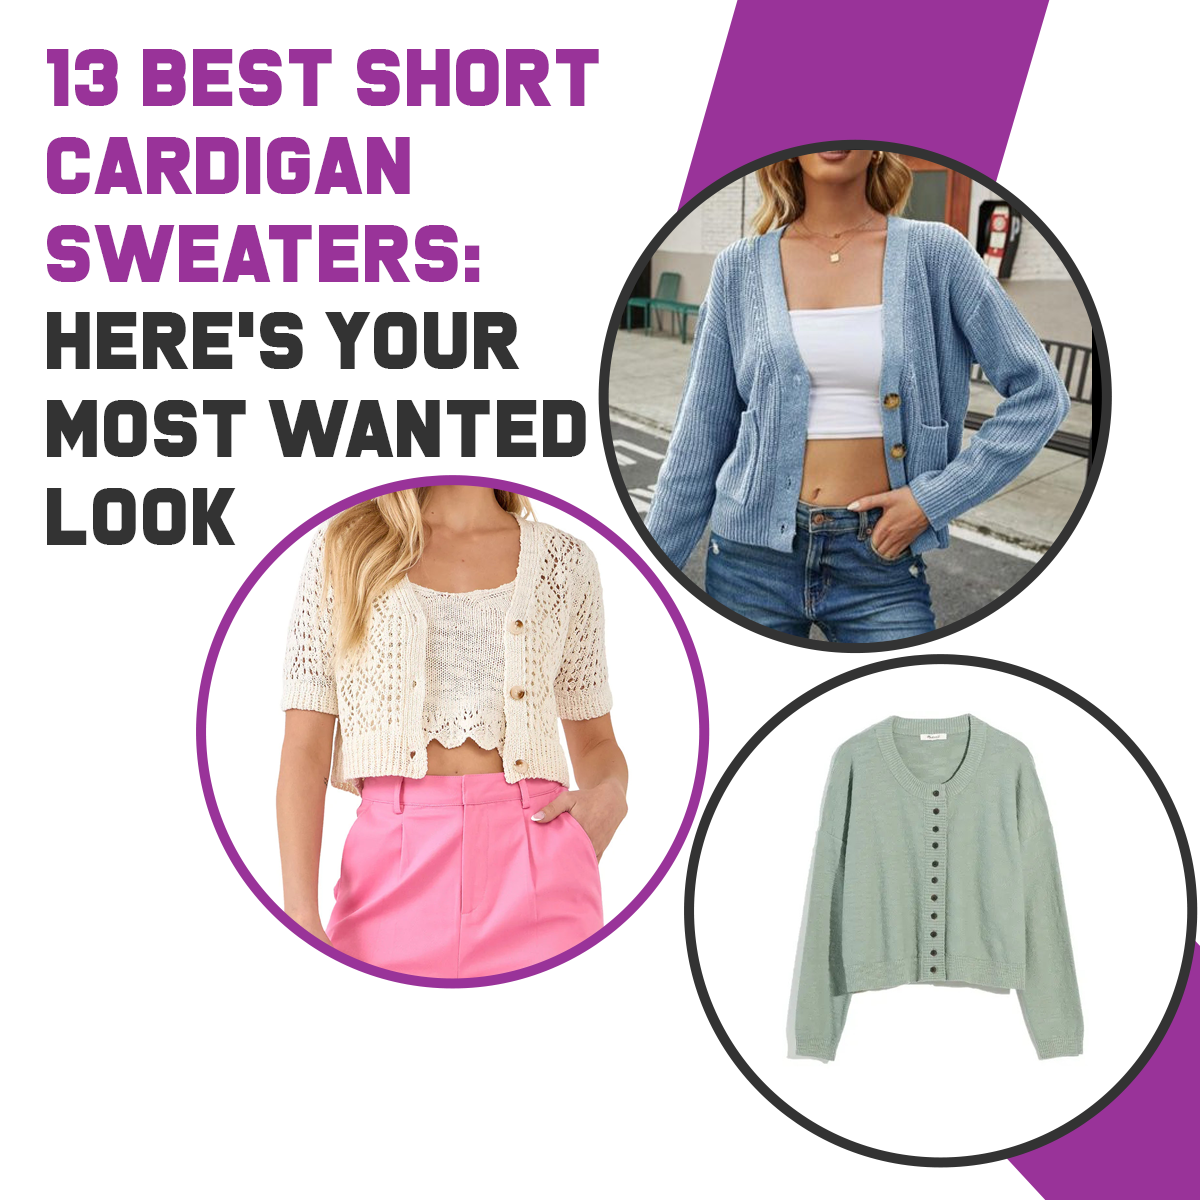 13 Best Short Cardigan Sweaters: Here’s Your Most Wanted Look